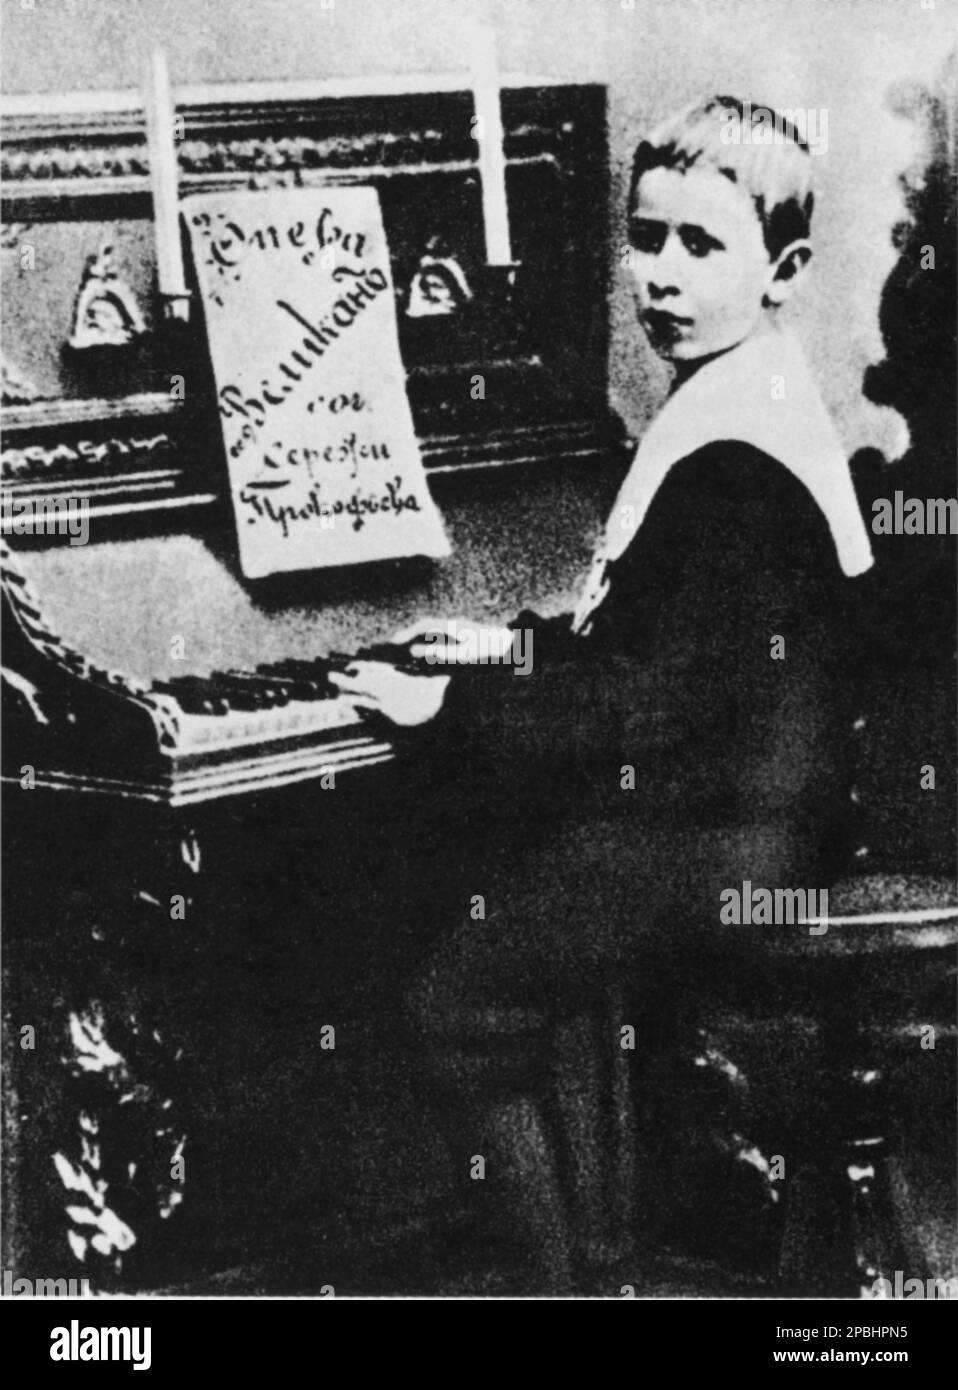 1900 : The russian music composer SERGEJ PROKOFIEV ( Sergej Sergeevic Prokof'ev,  1891 - 1953 ) aged 9 with the music partition of his simphony THE GIANT .  Prokofiev was a Russian composer who mastered numerous musical genres and came to be admired as one of the greatest composers of the 20th century - Sergej Sergejevic  Prokofjev , Sergei , Sergey or Serge  and Prokofief  Prokof'ev  Prokofiev  Prokoviev Prokofieff - bambino - child - children - bambini - personalita' da giovane giovani - personality when was young  - COMPOSITORE - OPERA LIRICA - CLASSICA - CLASSICAL - PORTRAIT - RITRATTO - M Stock Photo